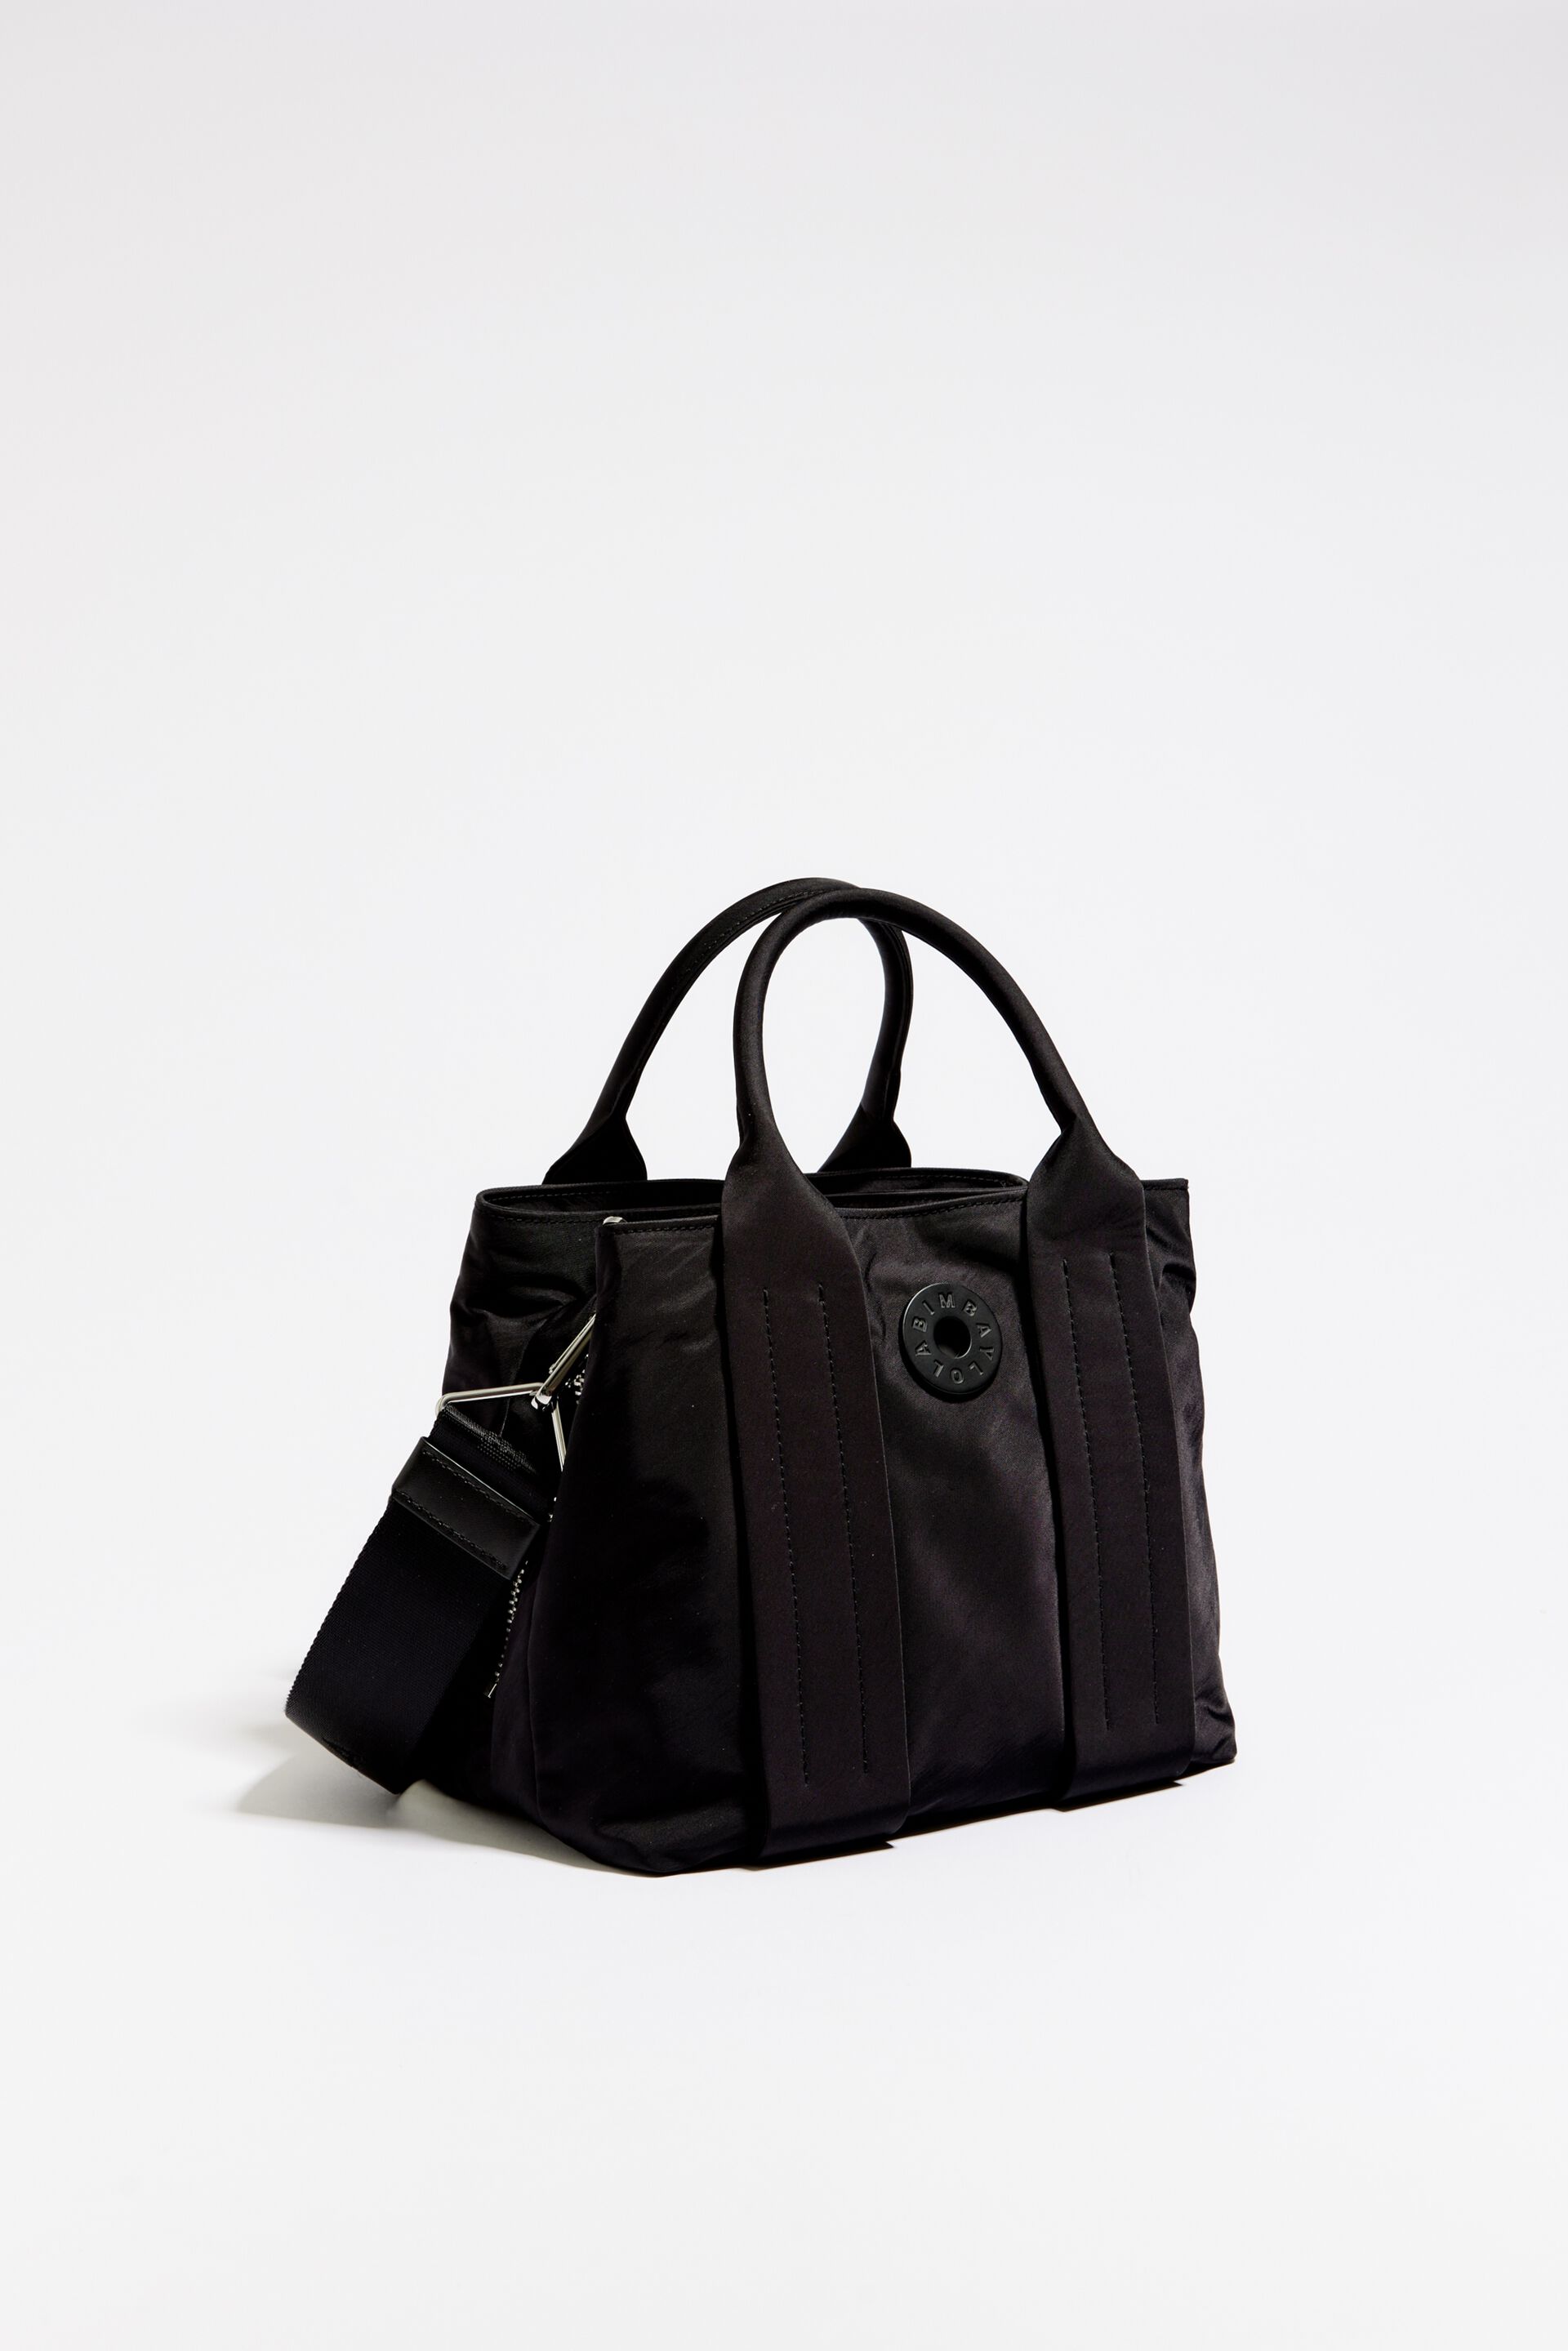 LB BAGS 2021 Now on bimbaylola.com, LB BAGS 2021. Now available on   By BIMBA Y LOLA